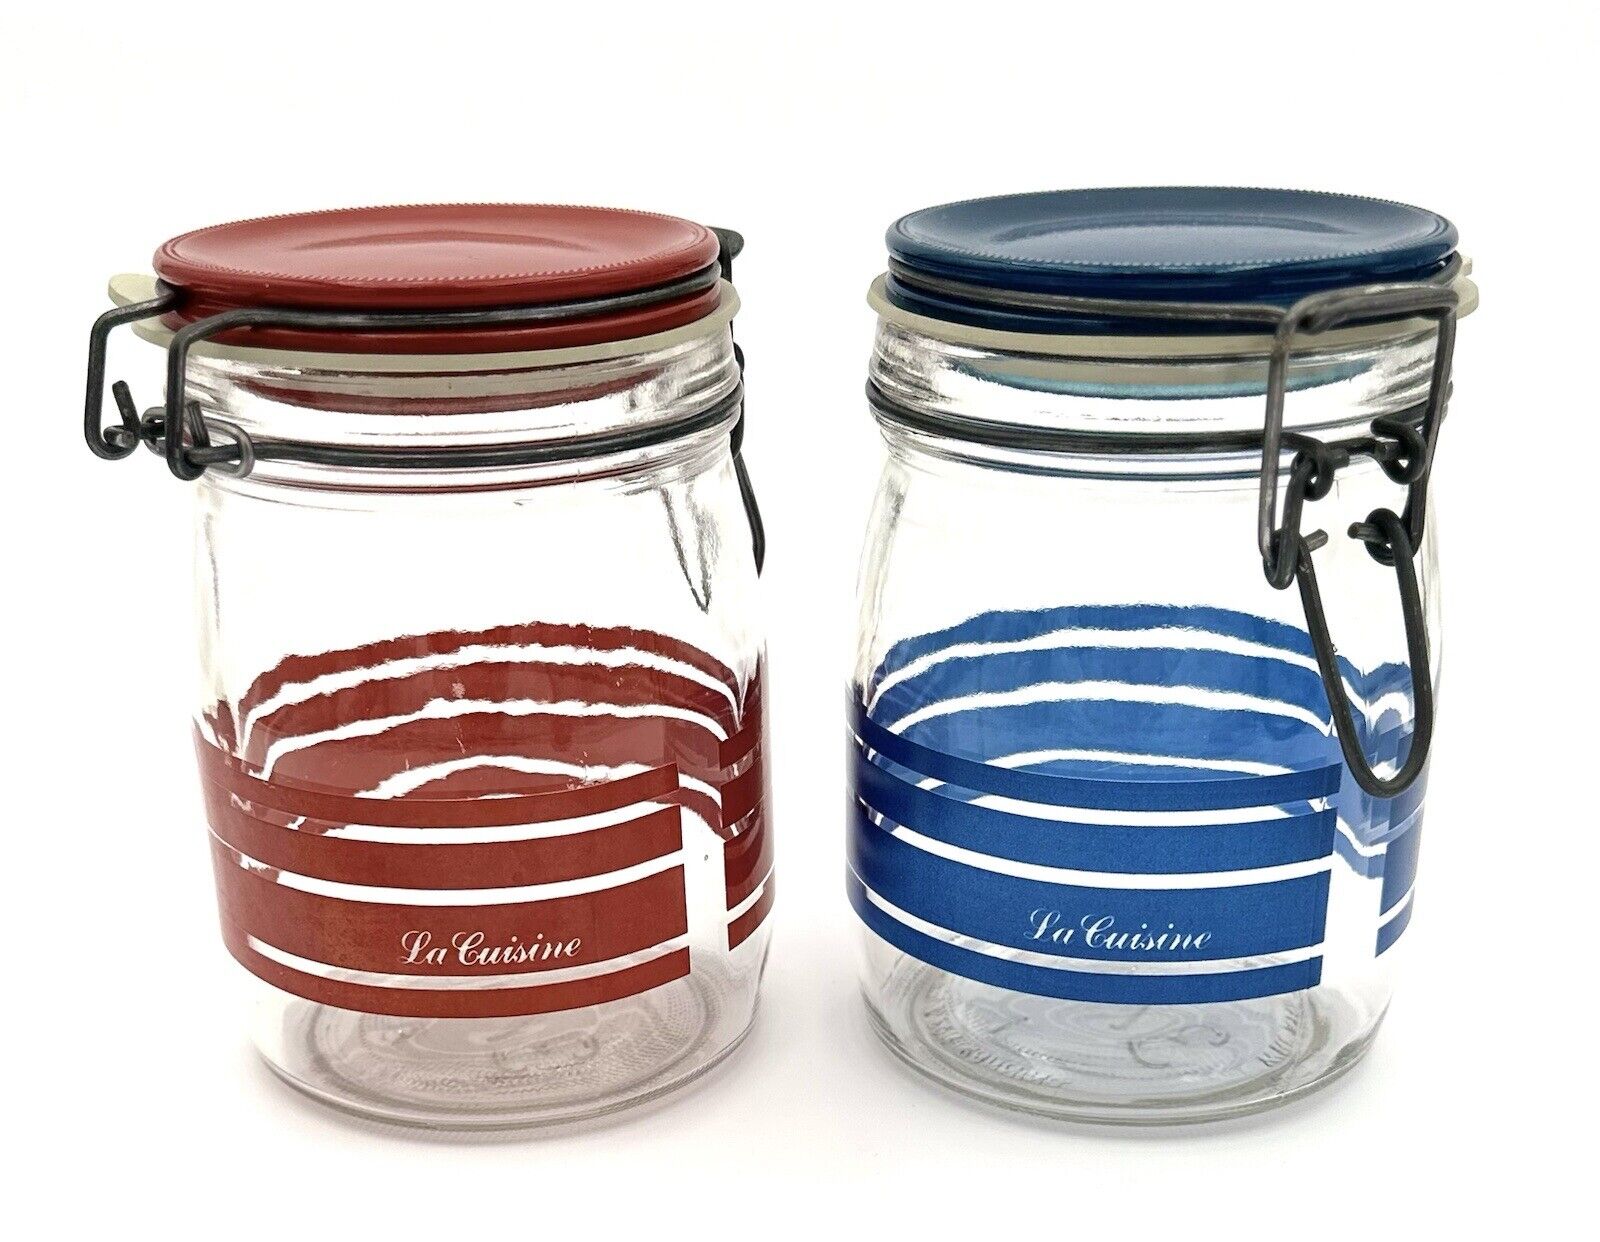 VINTAGE RED AND BLUE KITCHEN GLASS CANISTERS “LA CUISINE” 0.75 L EACH